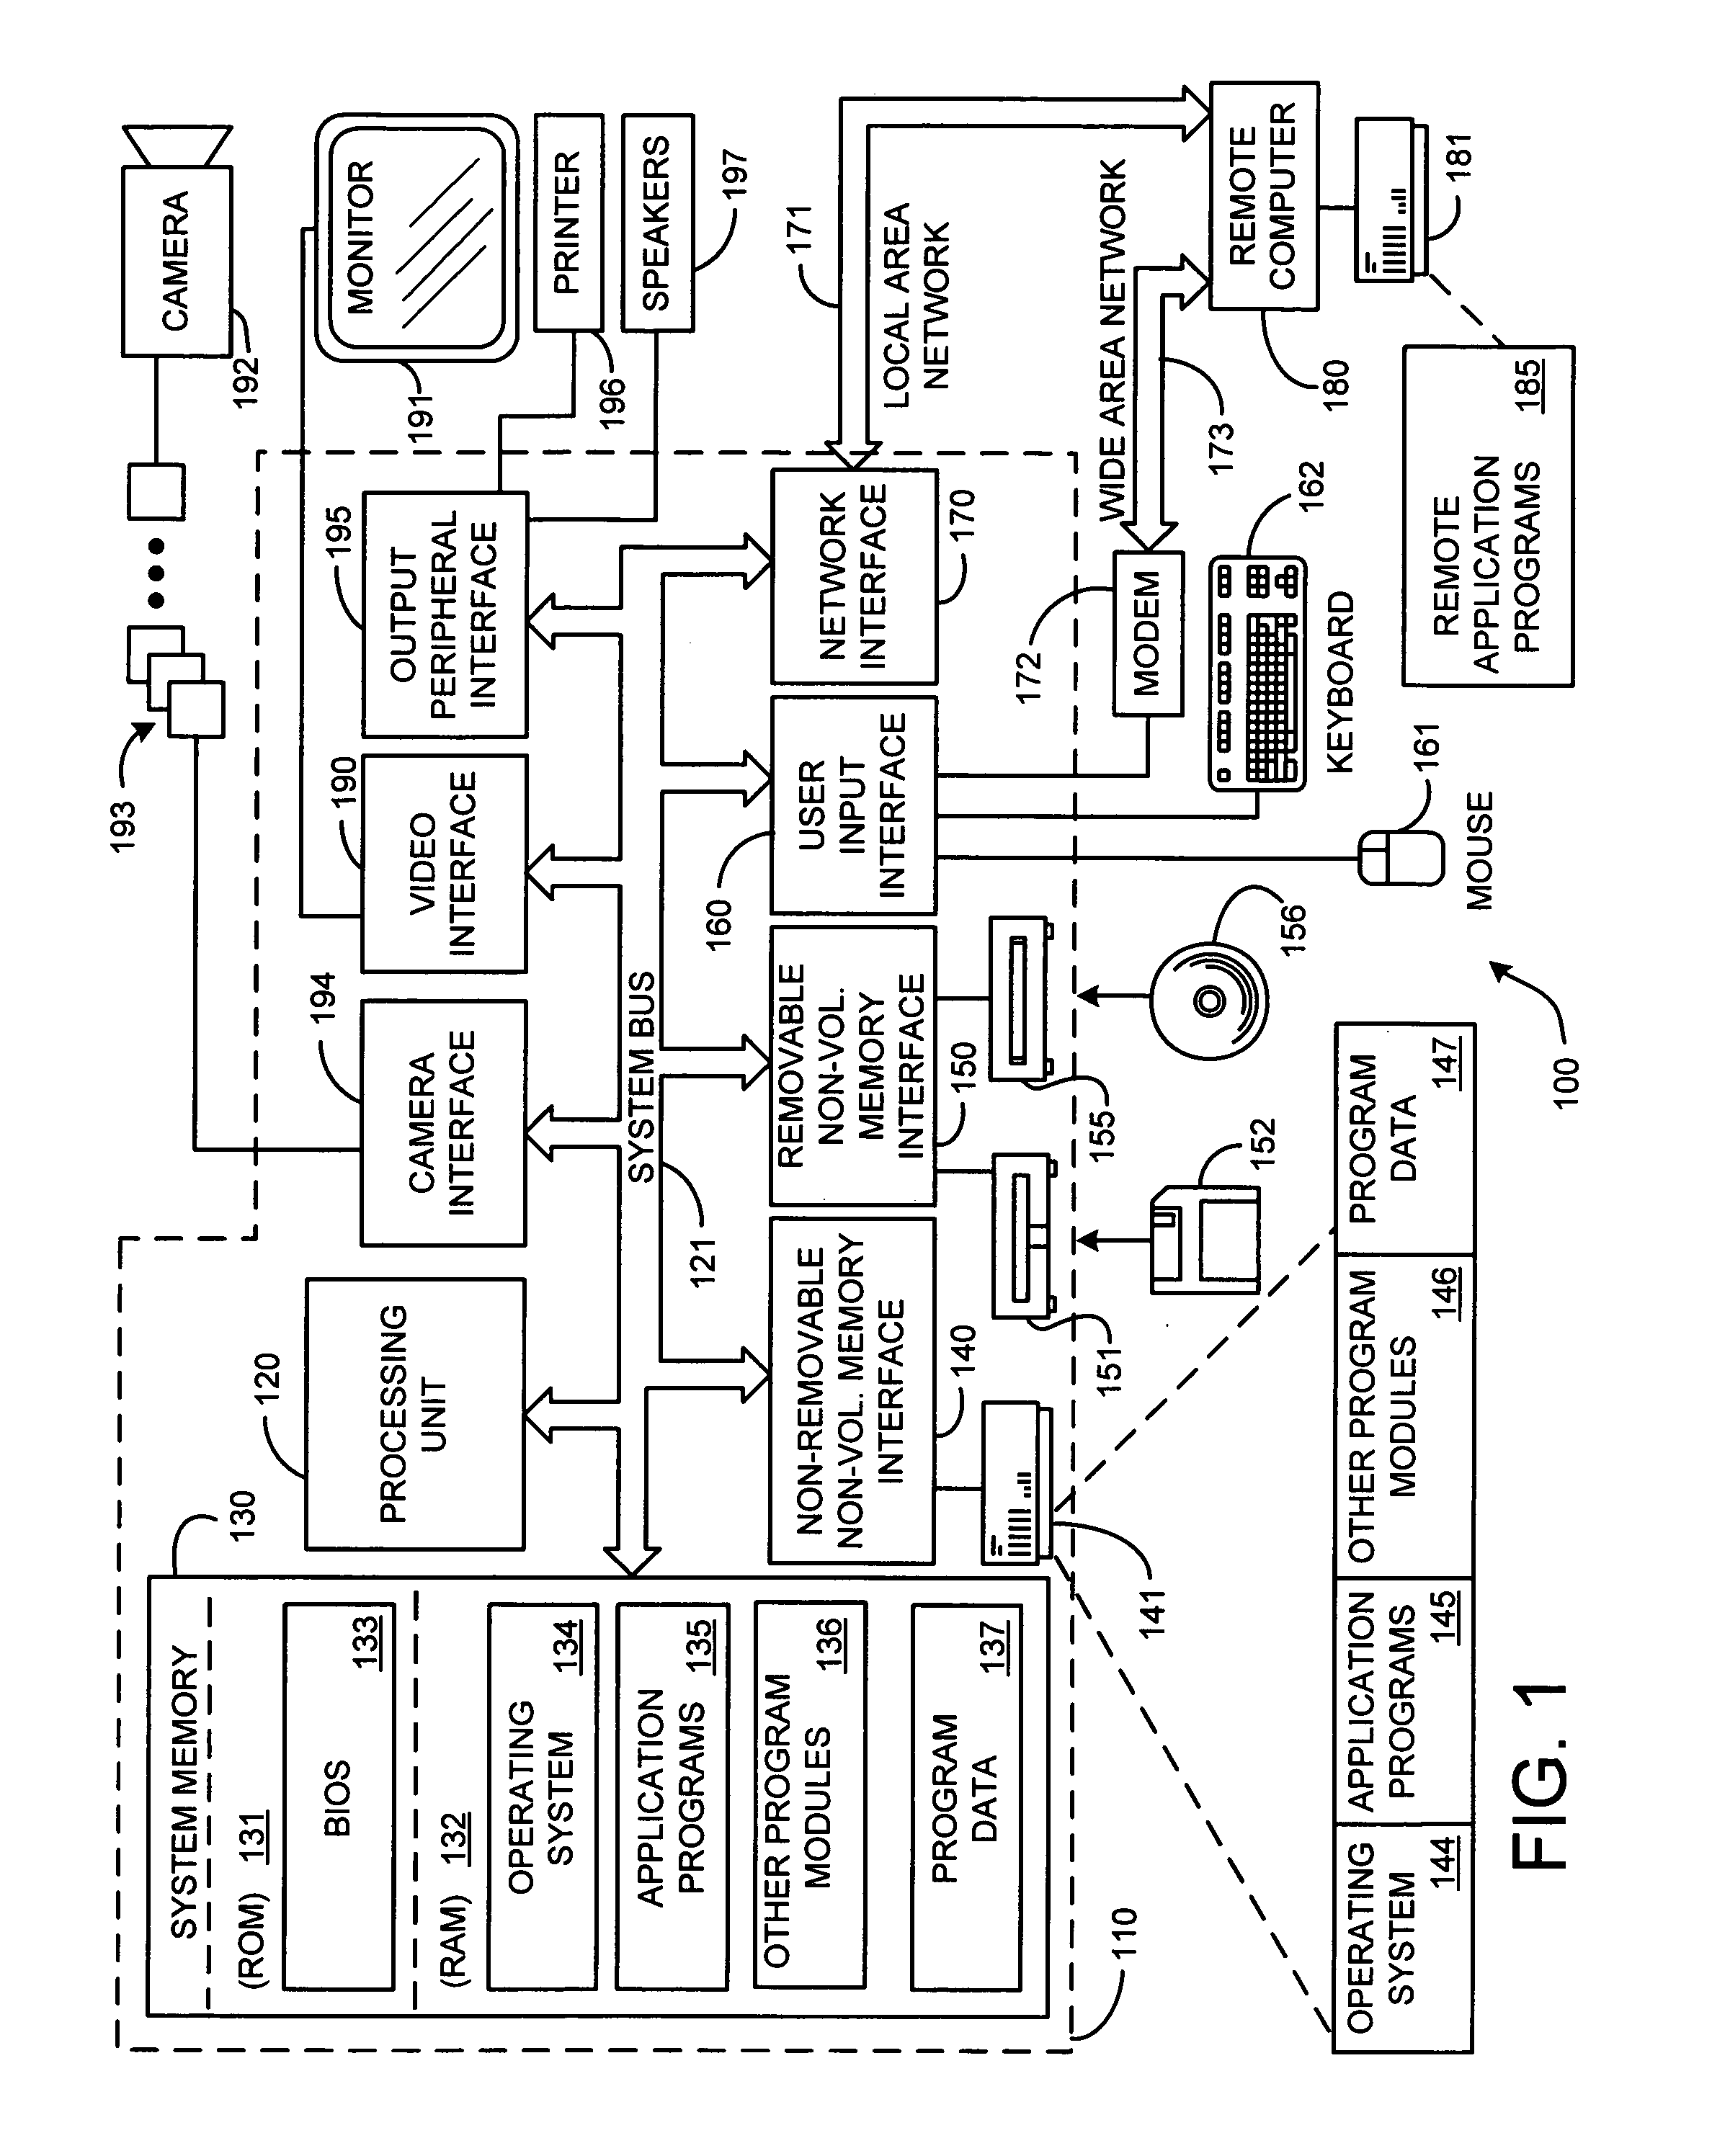 System and process for controlling a shared display given inputs from multiple users using multiple input modalities